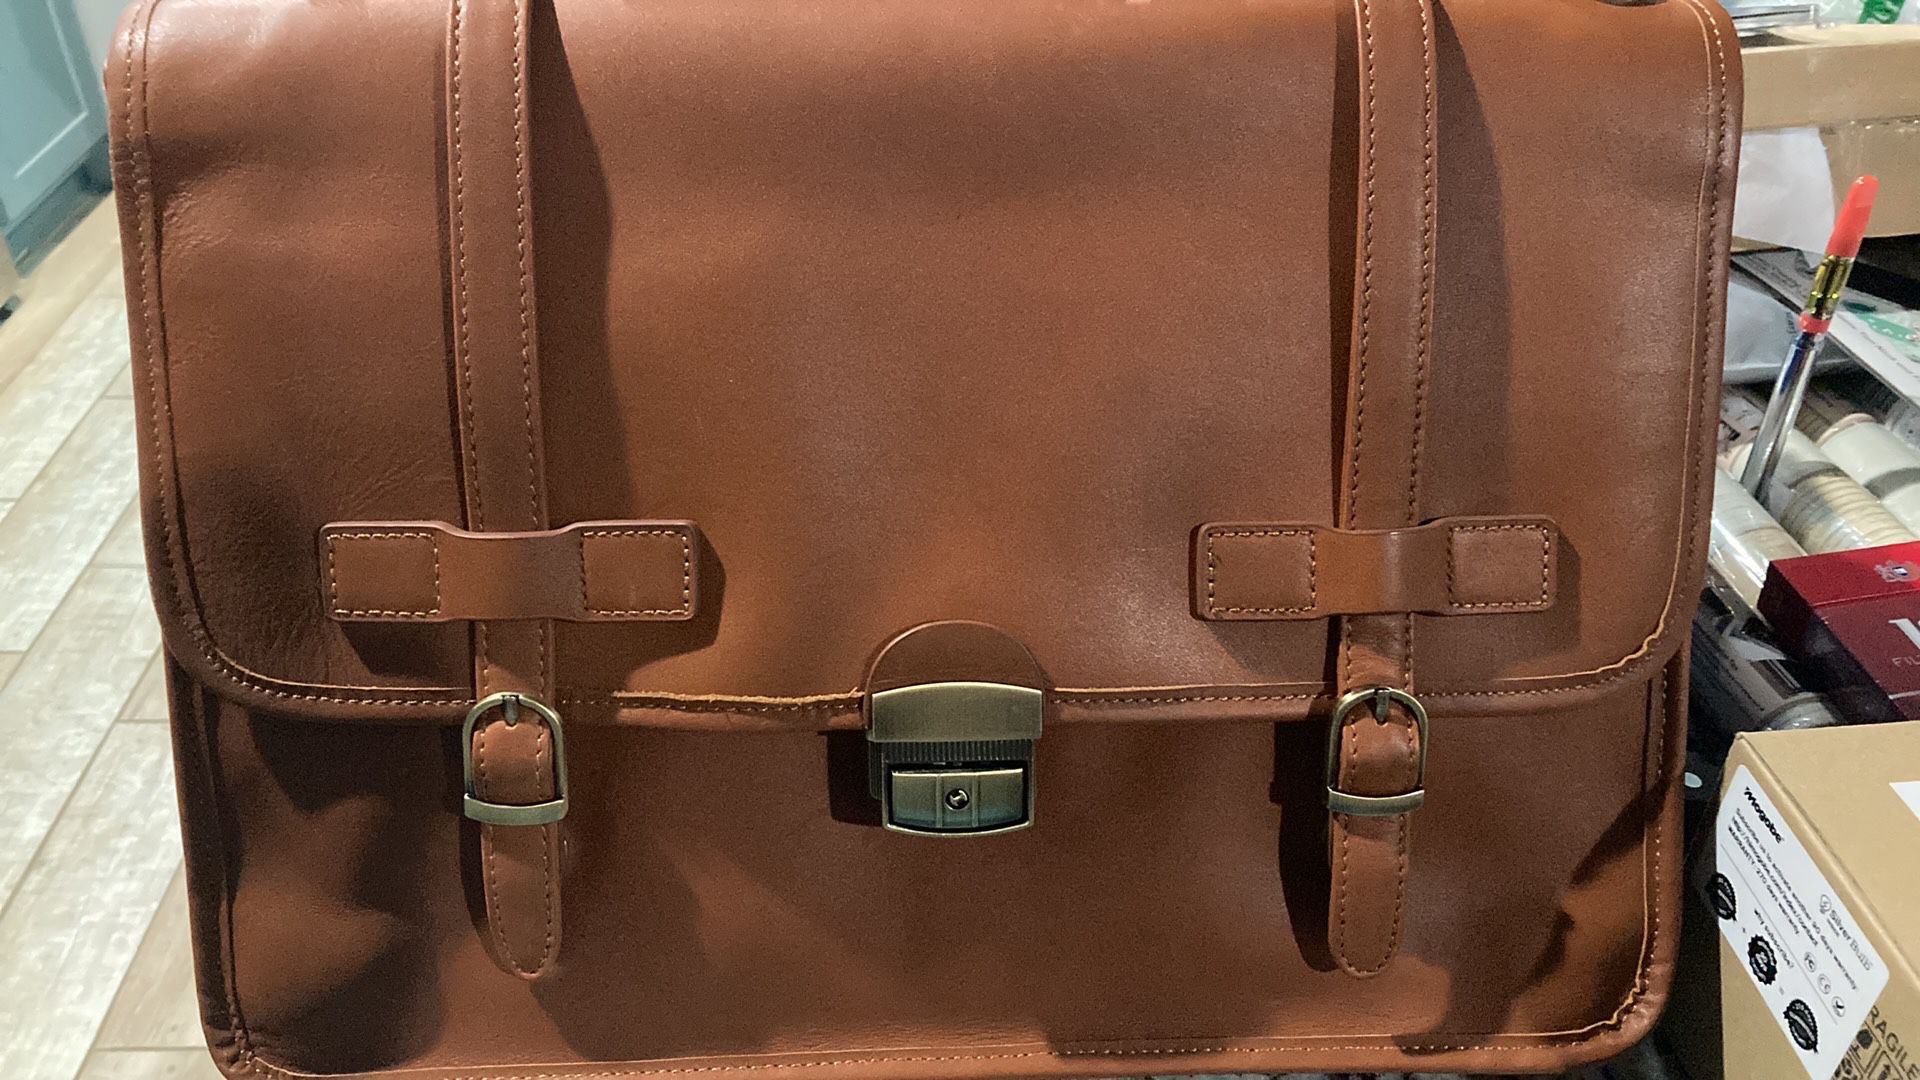 Leather Briefcase 